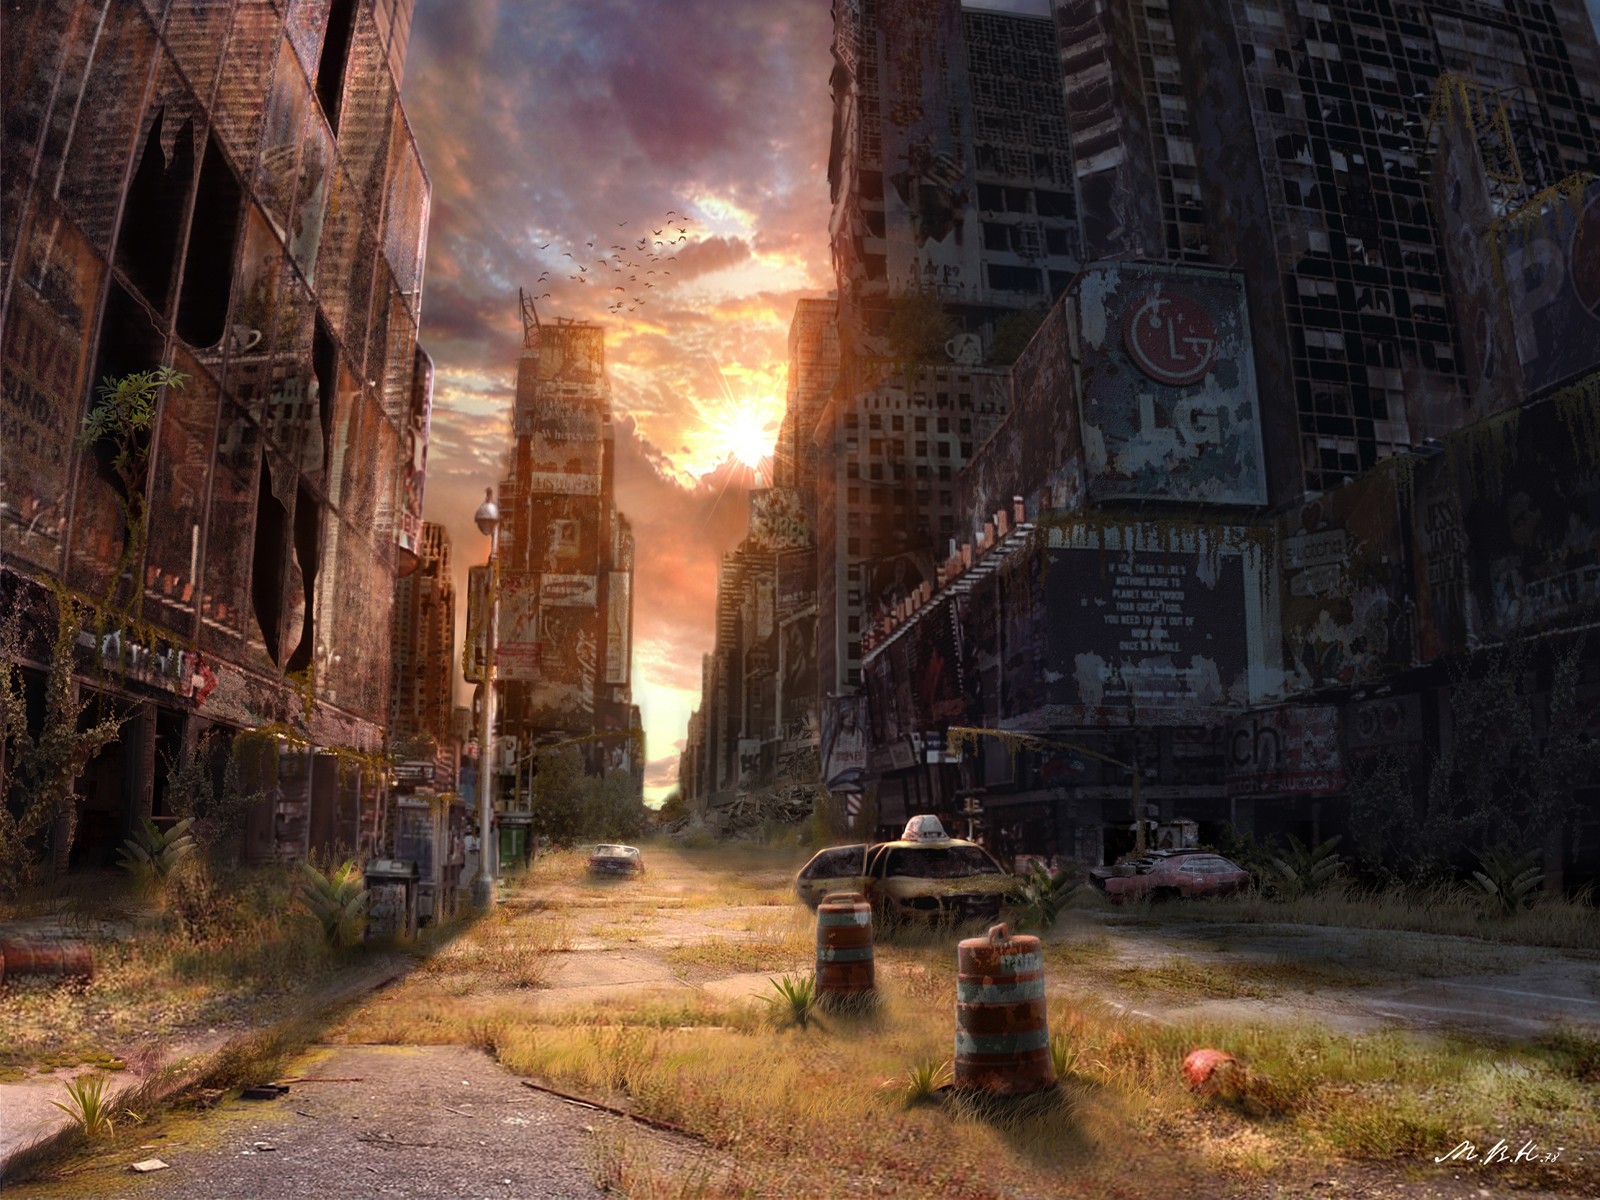 Wallpaper, video games, city, cityscape, night, apocalyptic, artwork, town, Fallout, ruins, alley, screenshot 1600x1200